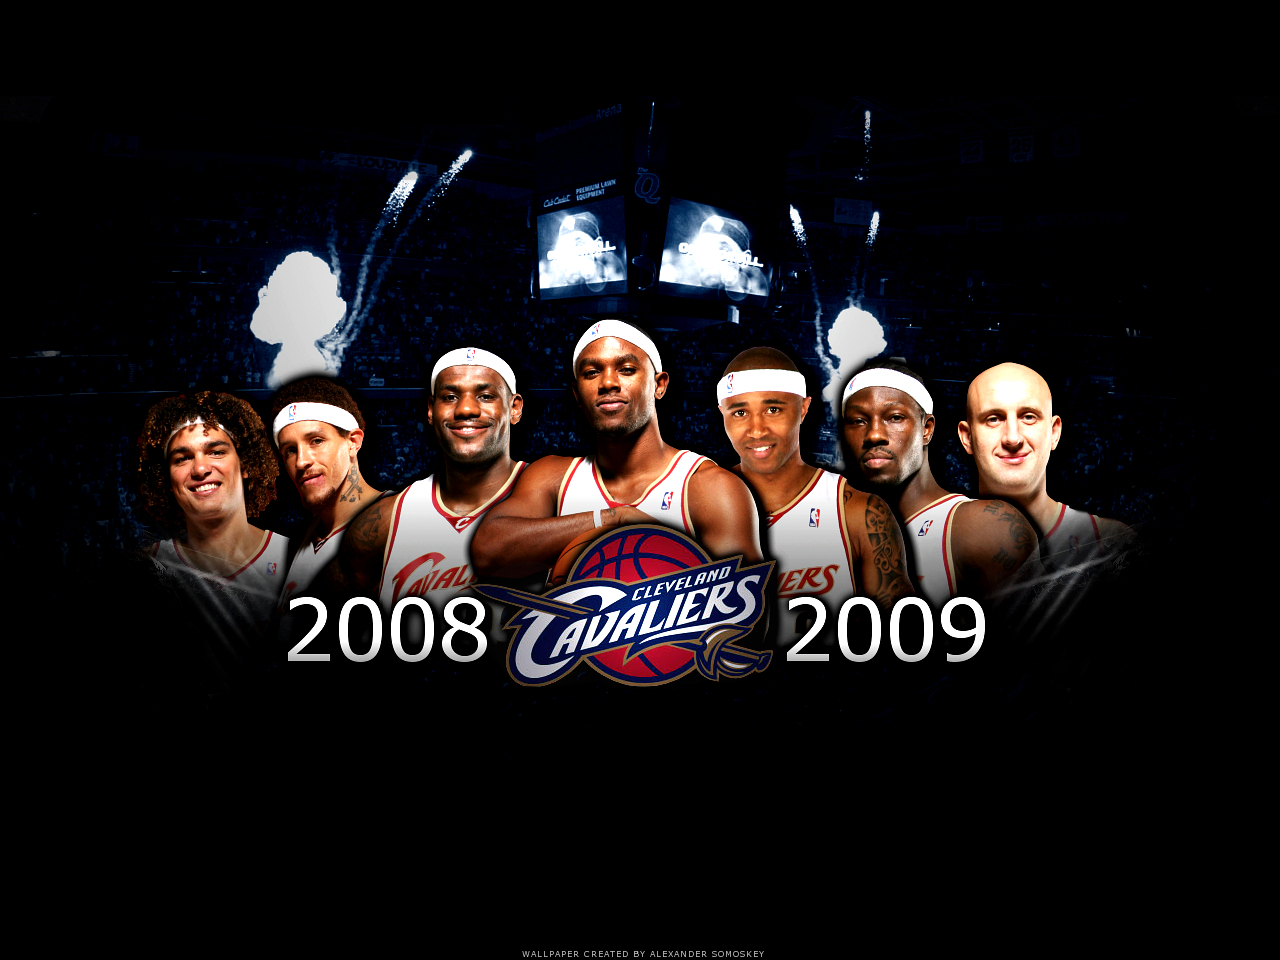  cleveland cavaliers wallpaper; Players, coaches, logos, jerseys, courts, 